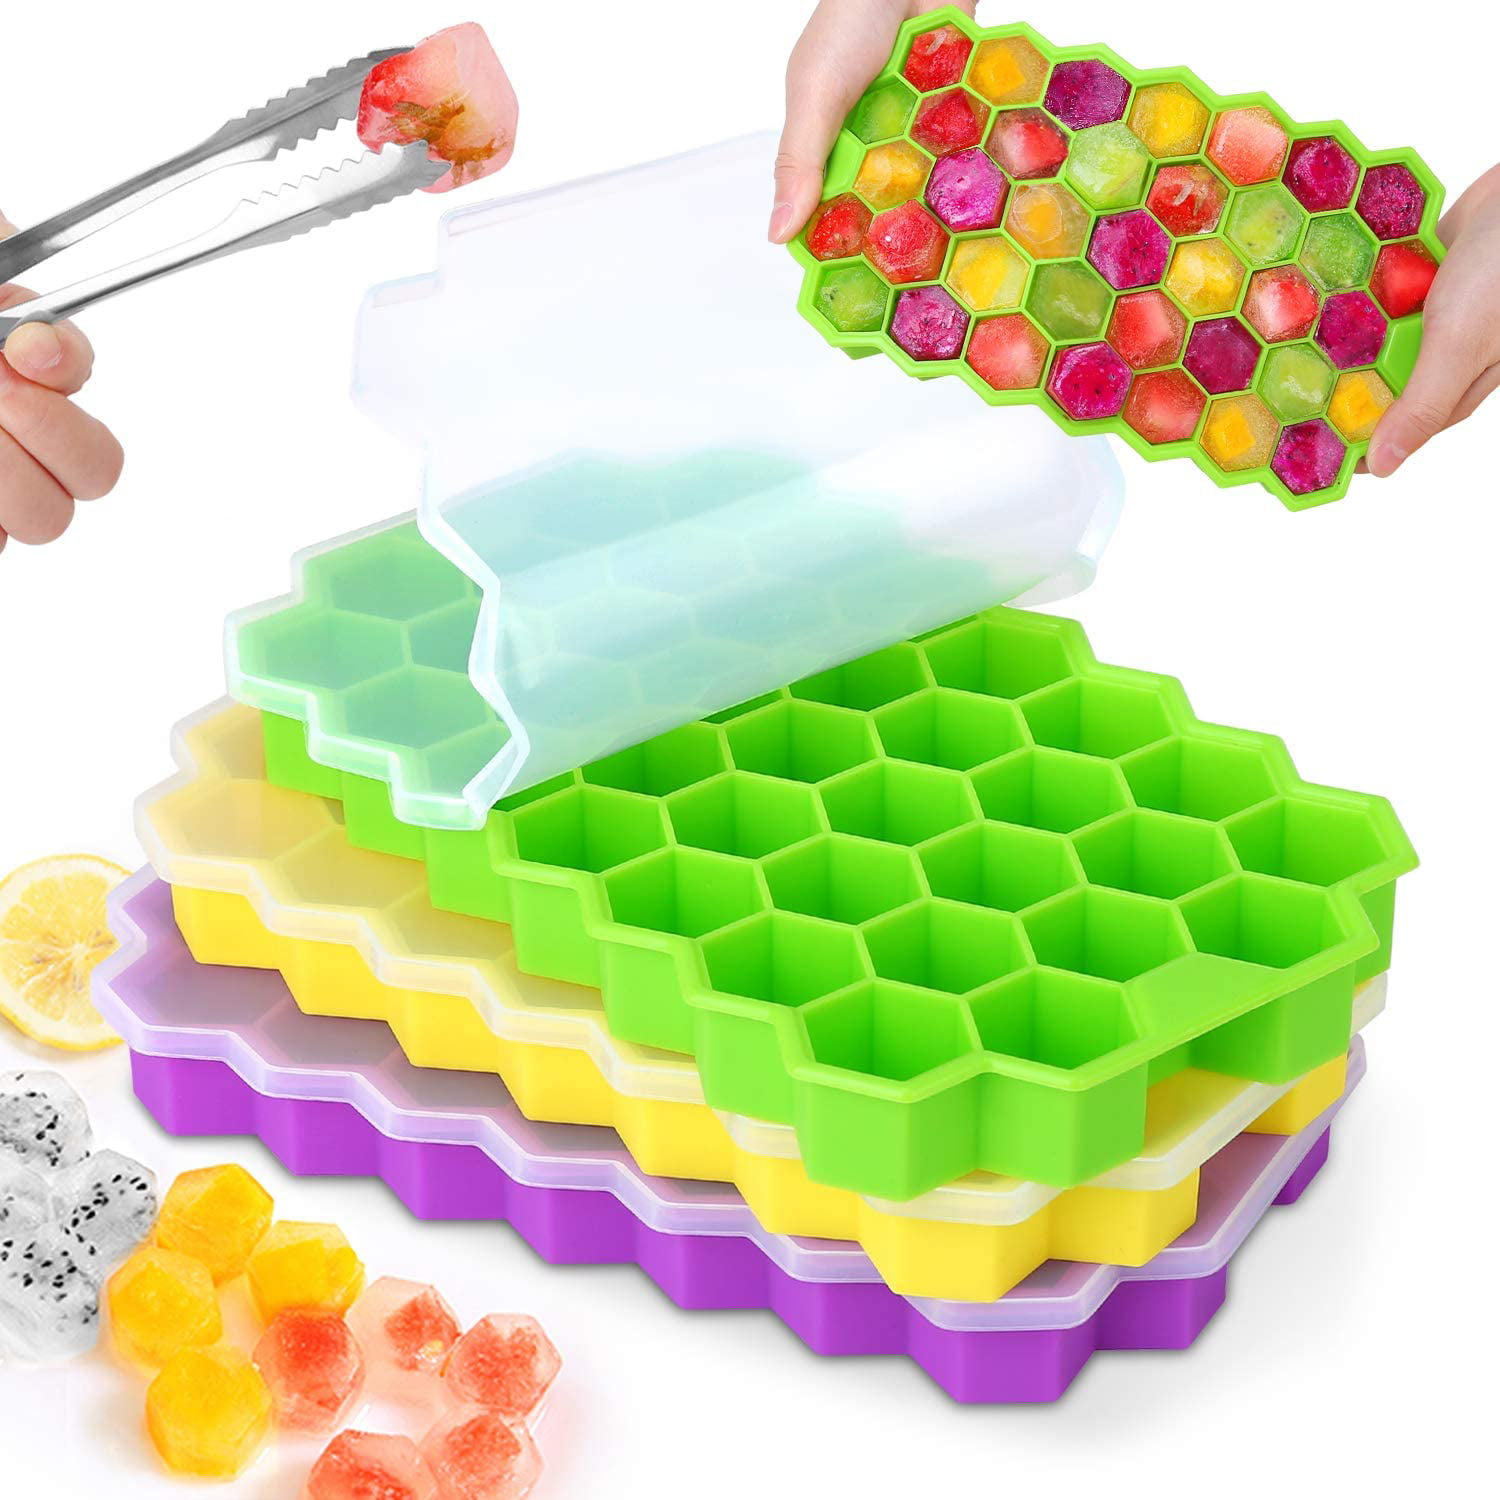 1, Green Whiskey LivingAid Easy-Release Ice Cube Molds Flexible Ice Cube maker 37-Ice Cube 1 Packs BPA Free for Cocktail Silicone Ice Cube Trays with Spill-Resistant Lids Chocolate Baby Food 